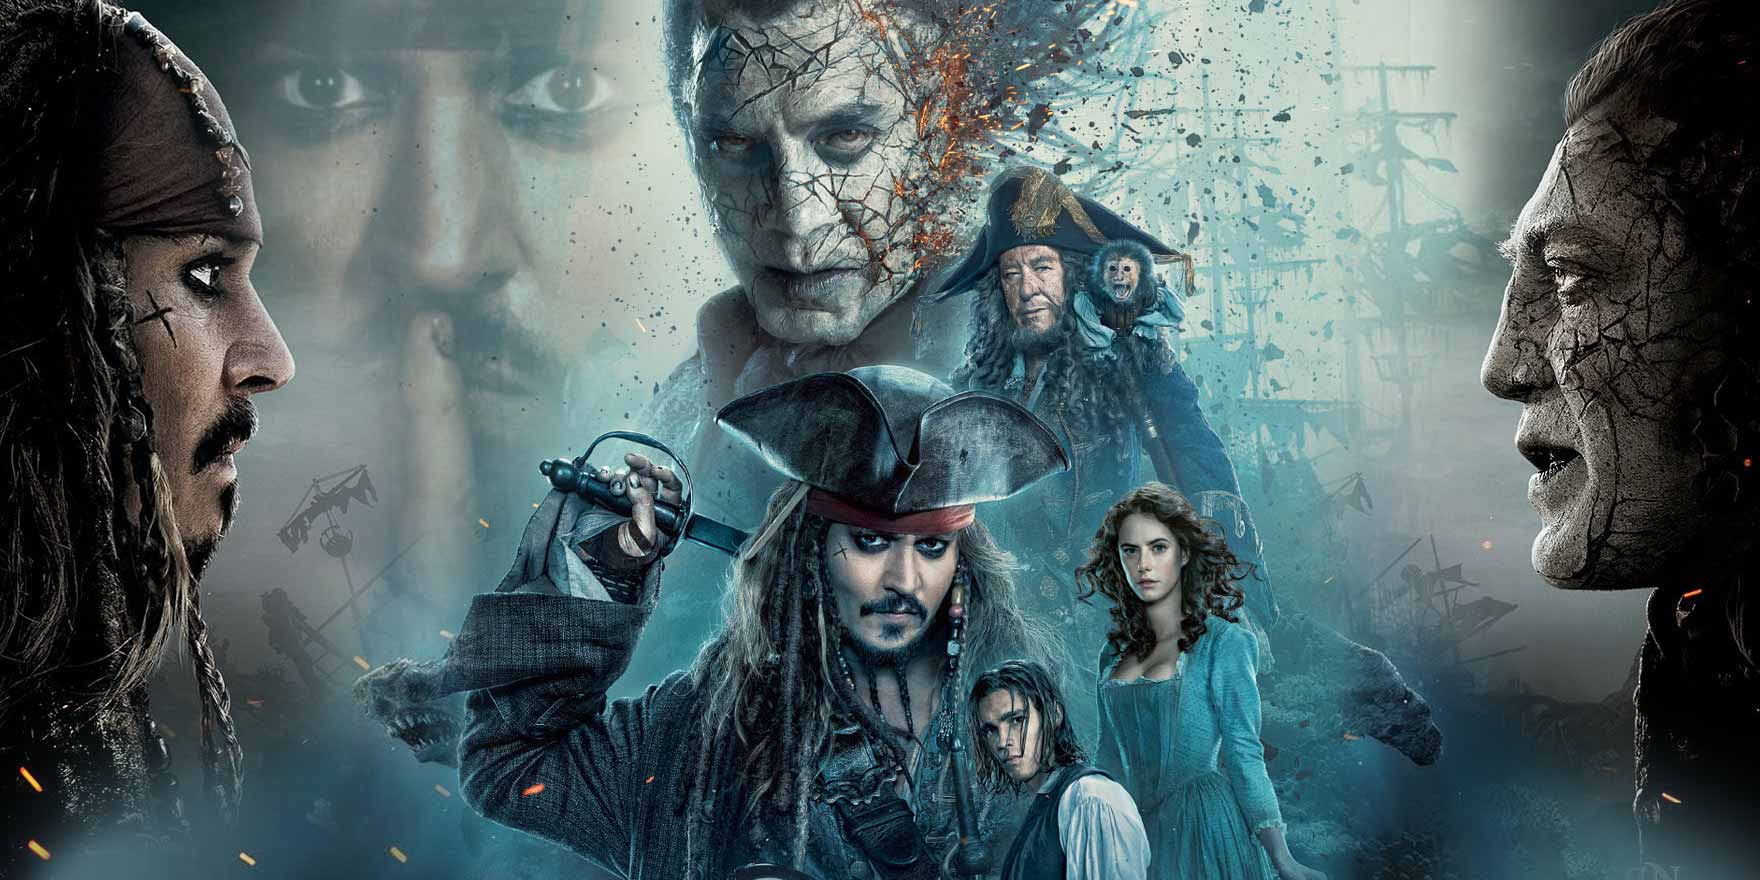 Pirates of the Caribbean 5 (3D) - Header Image